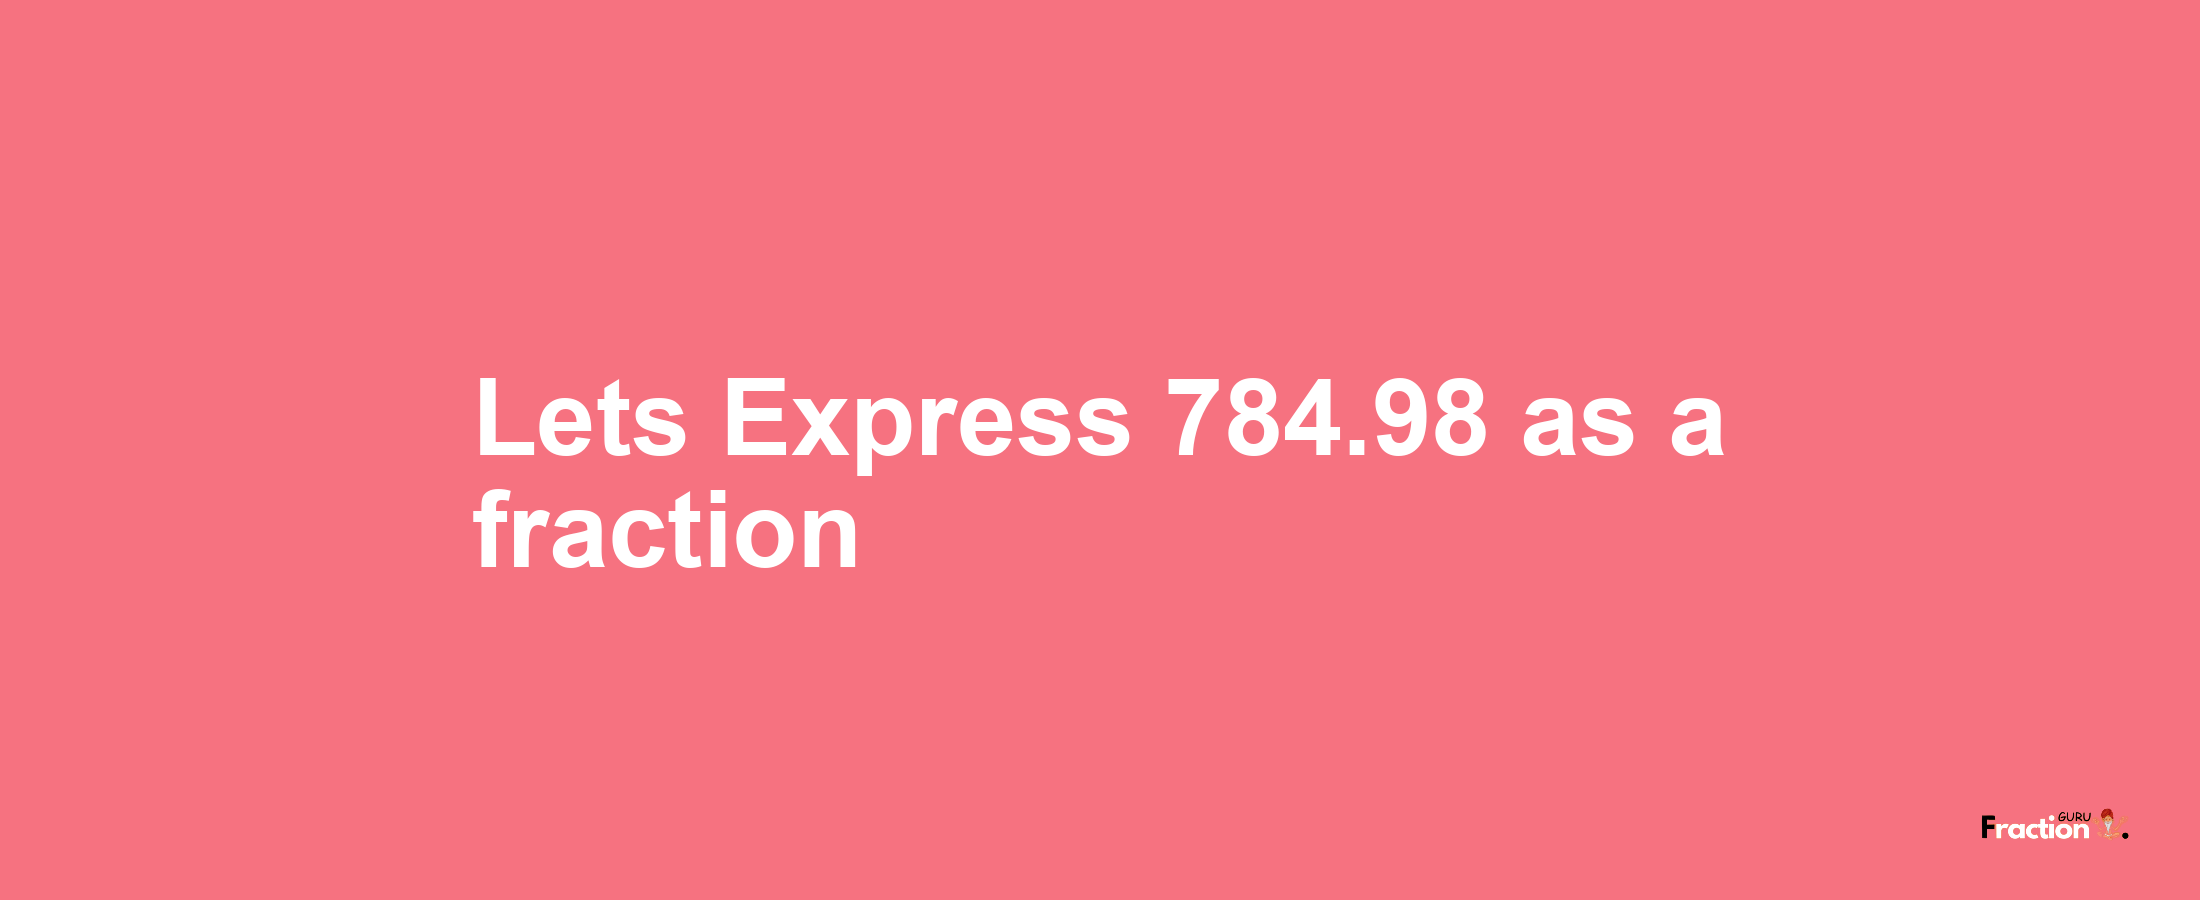 Lets Express 784.98 as afraction